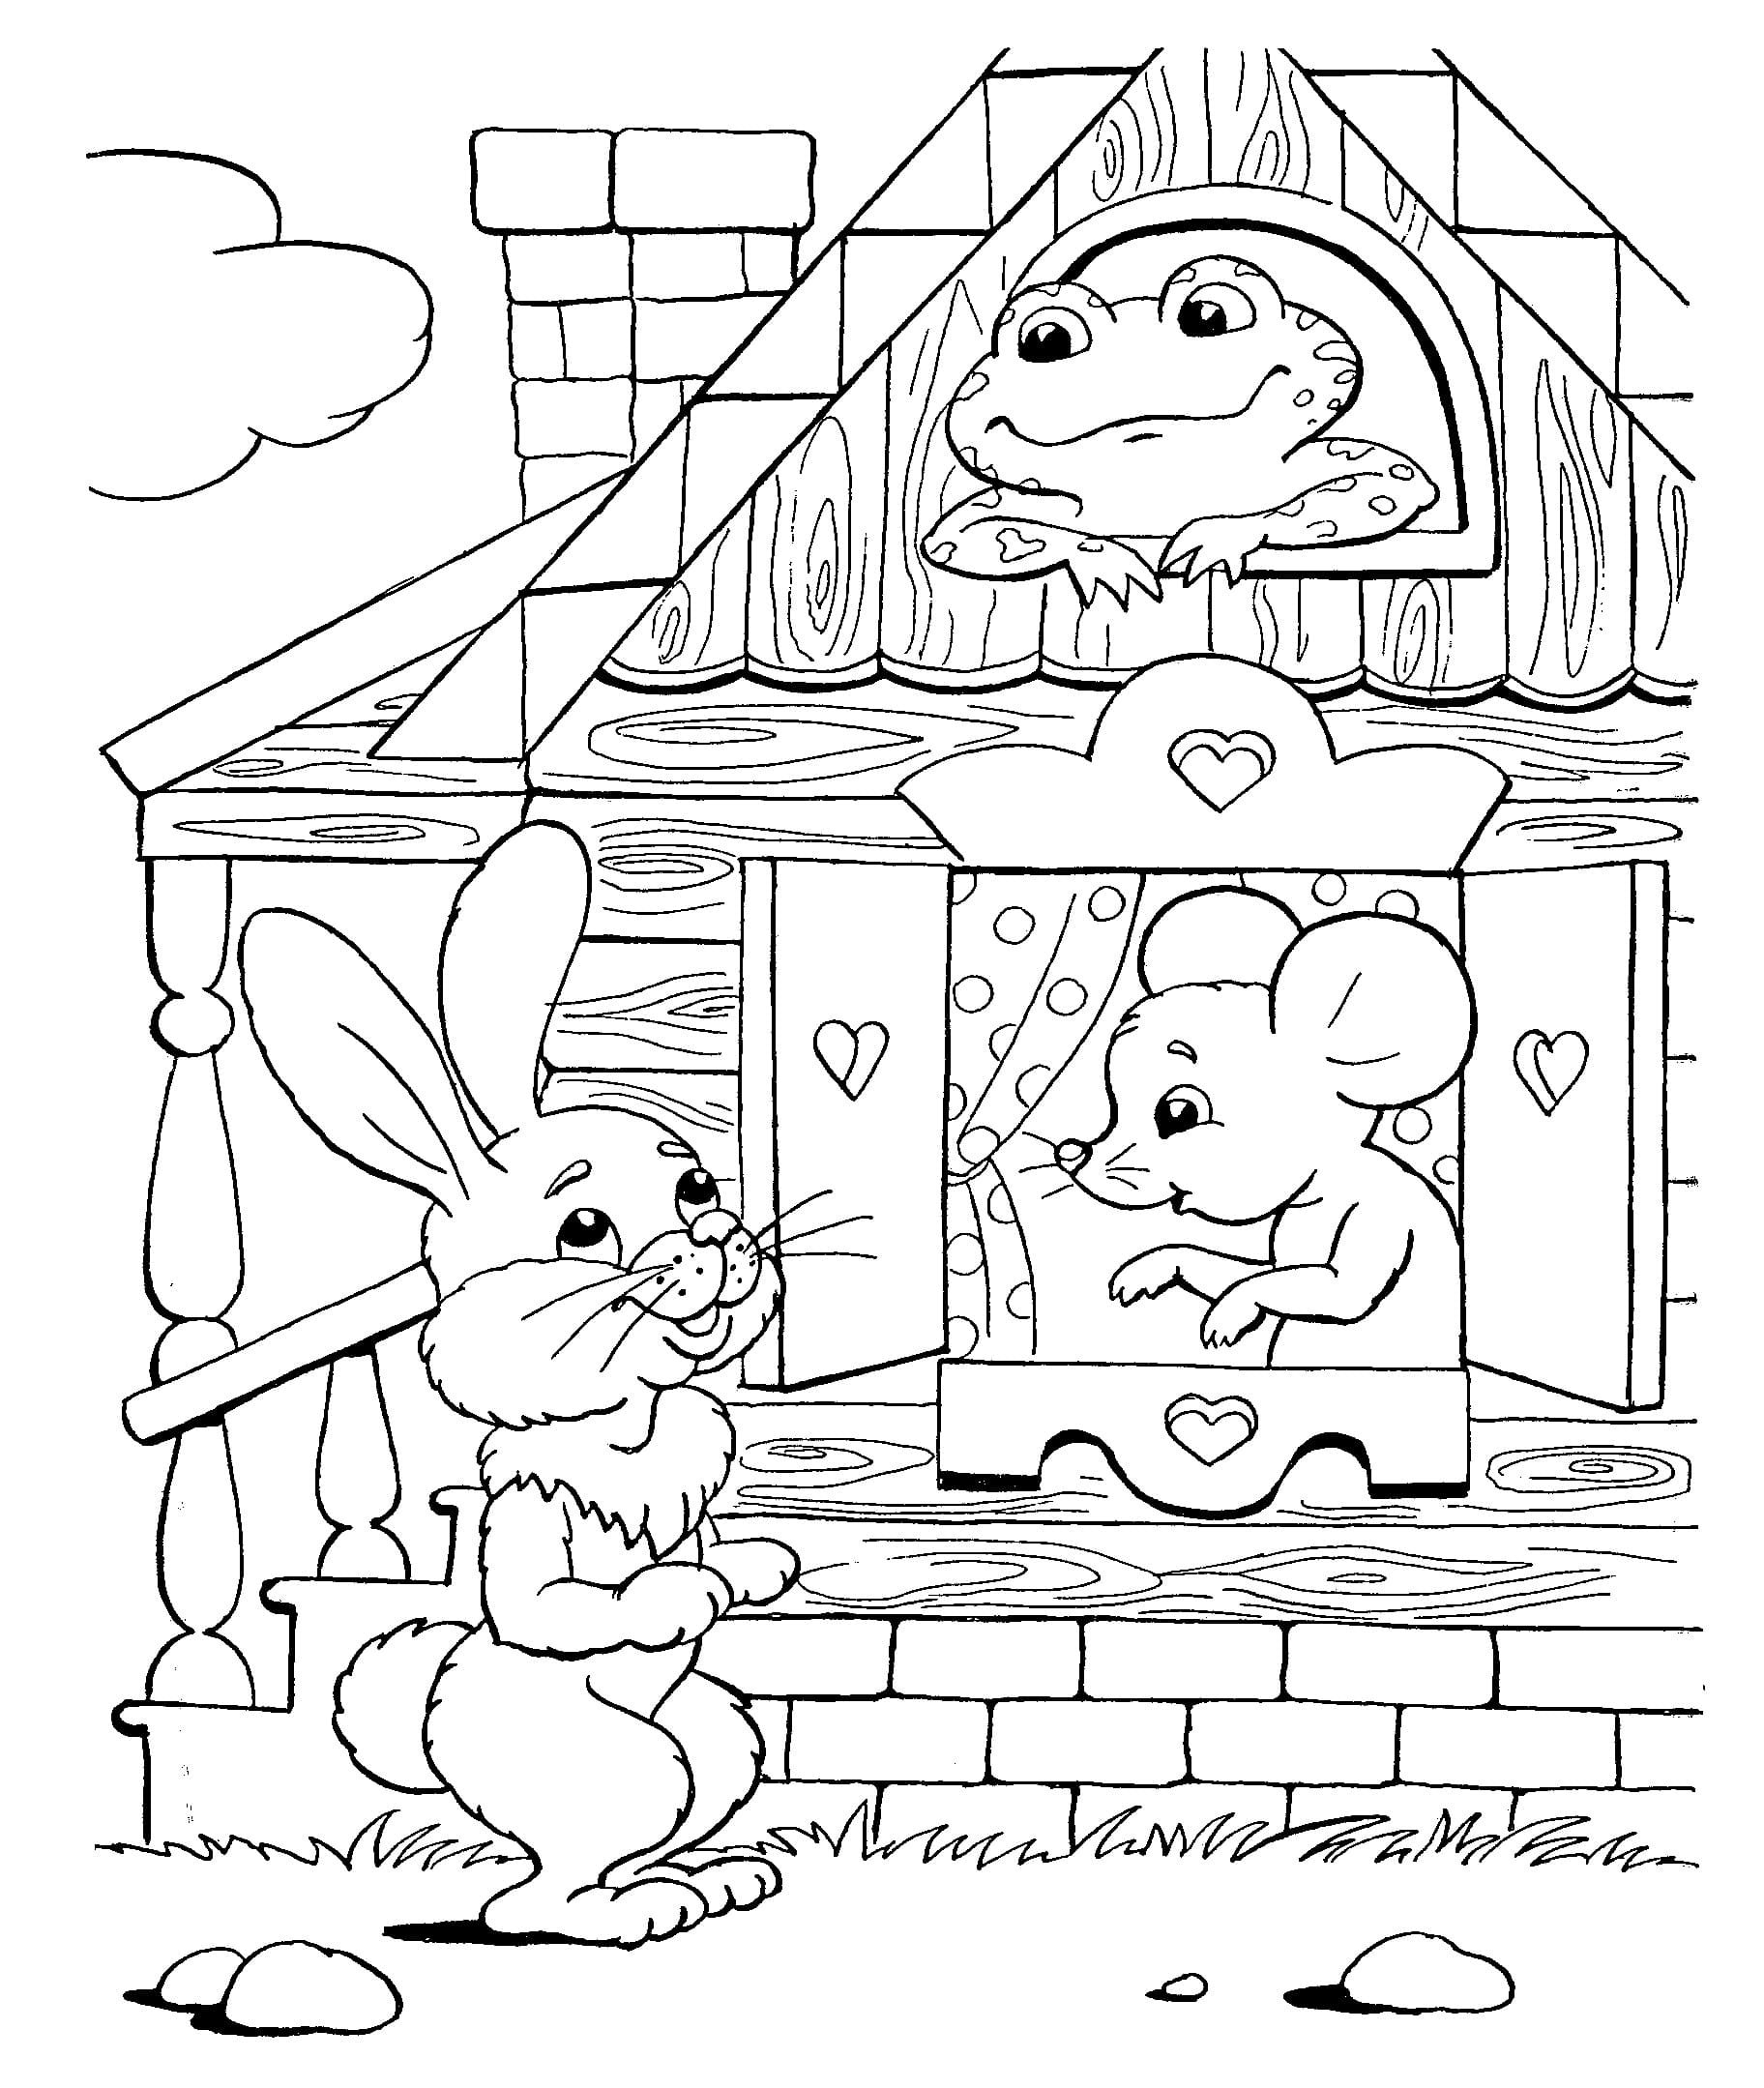 Coloring book witty bear-teremok